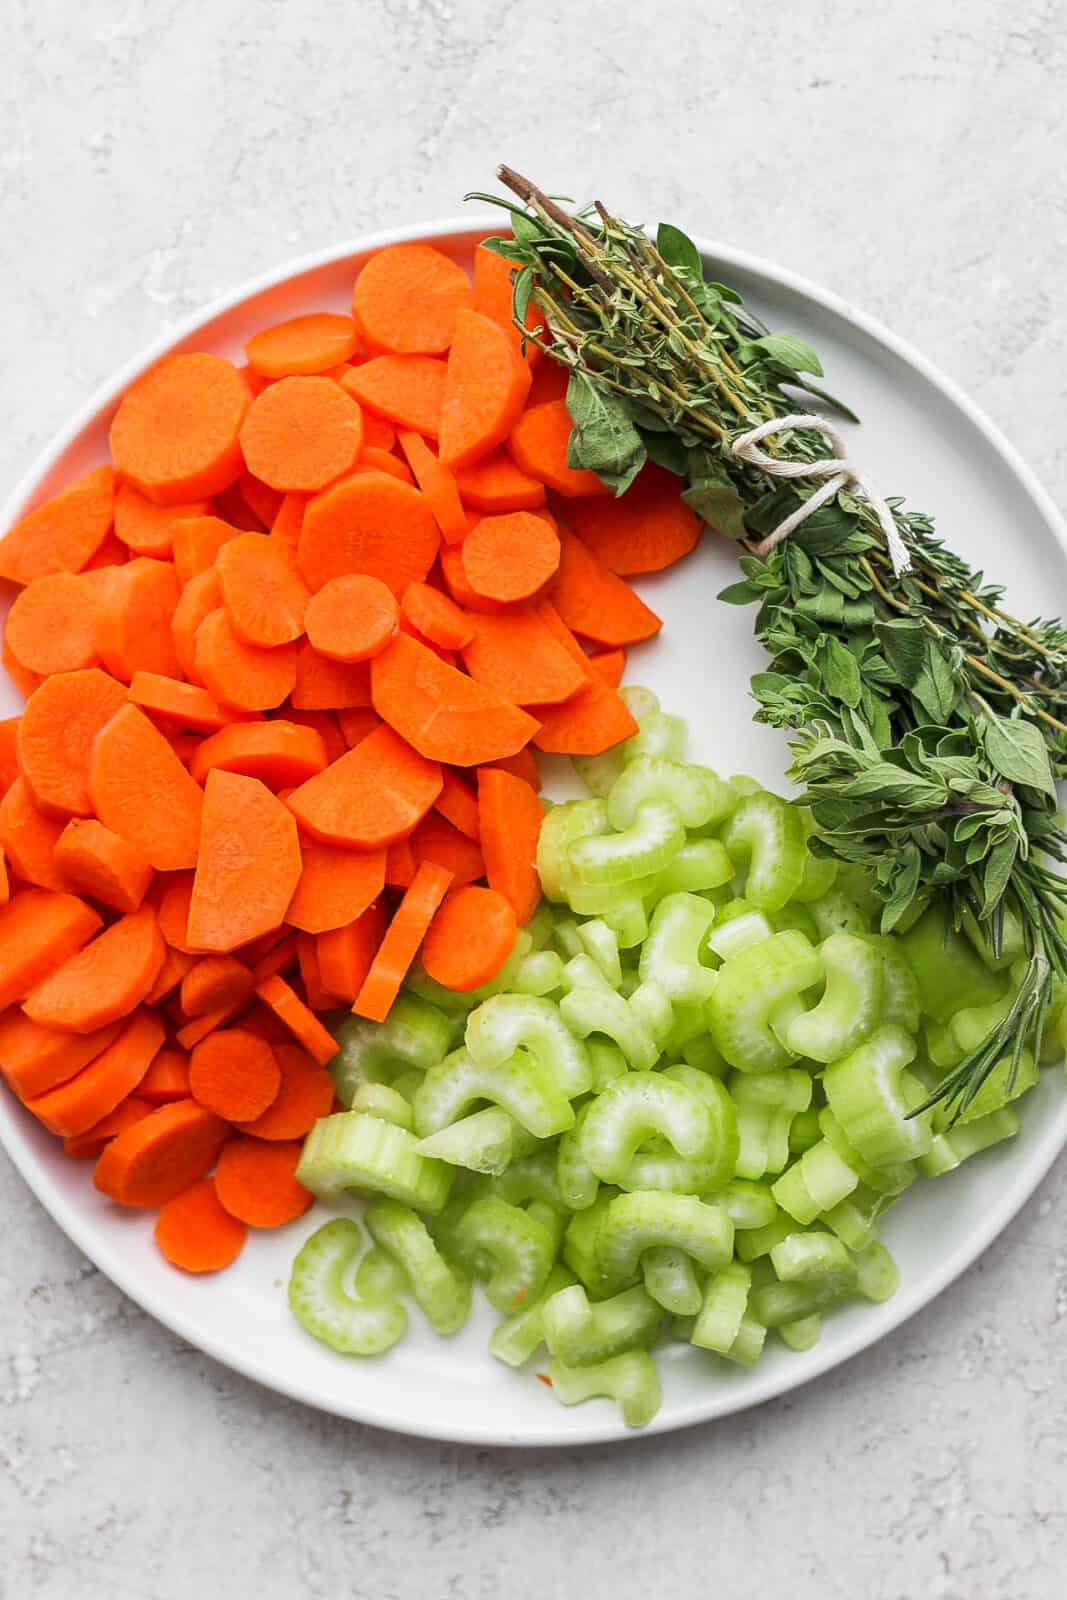 An herb bundle with cut-up carrots and celery.